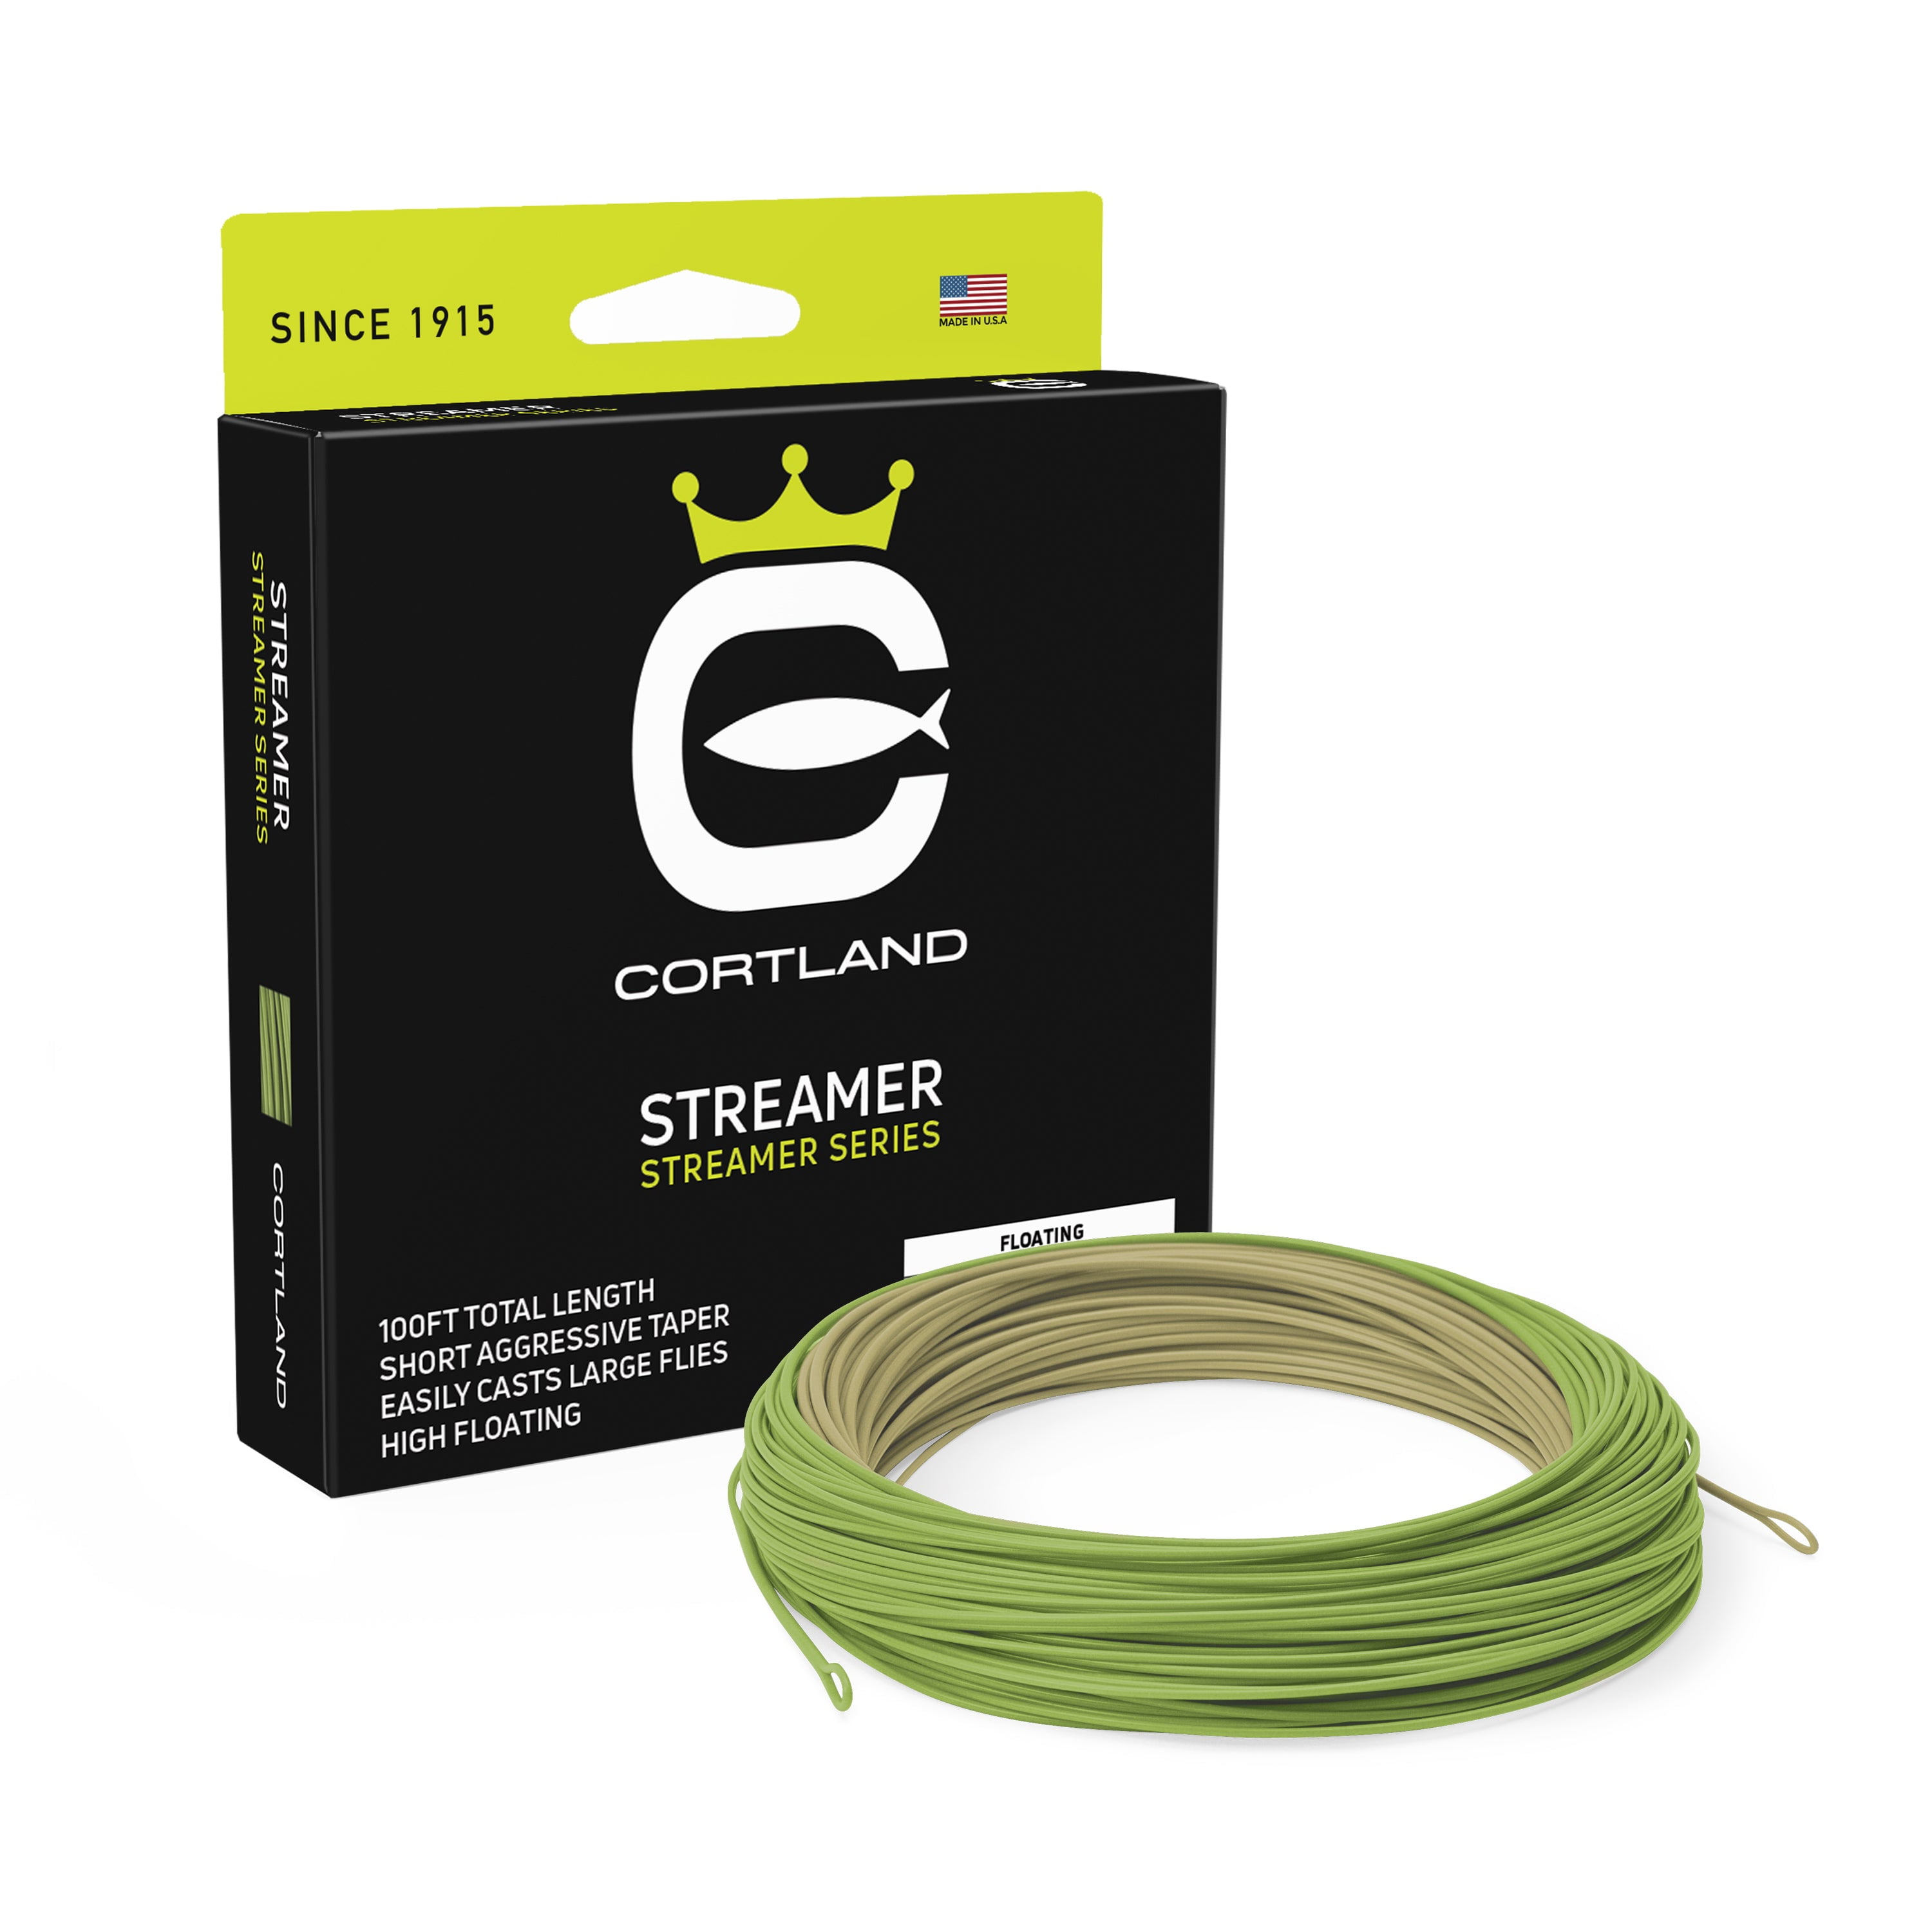 Kylebooker WF3F-WF8F WITH WELDED LOOP Fish Line Weight Forward FLOATING  100FT Fly Fishing Line 